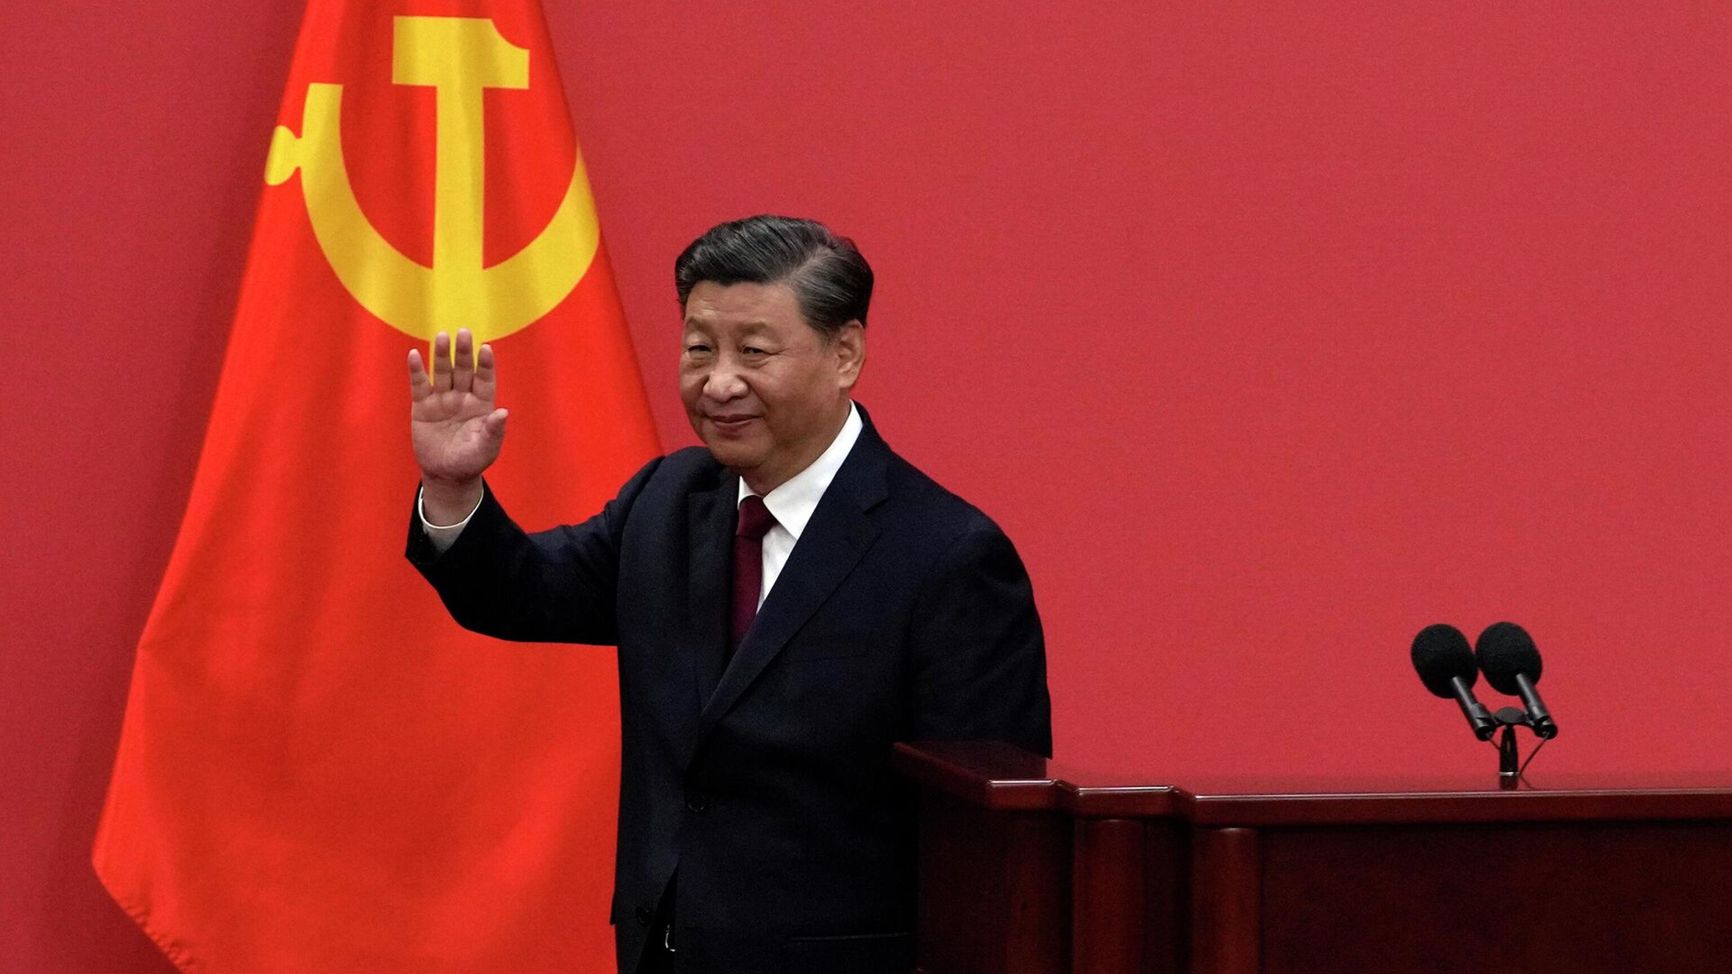 Xi Jinping, the Chinese dictator